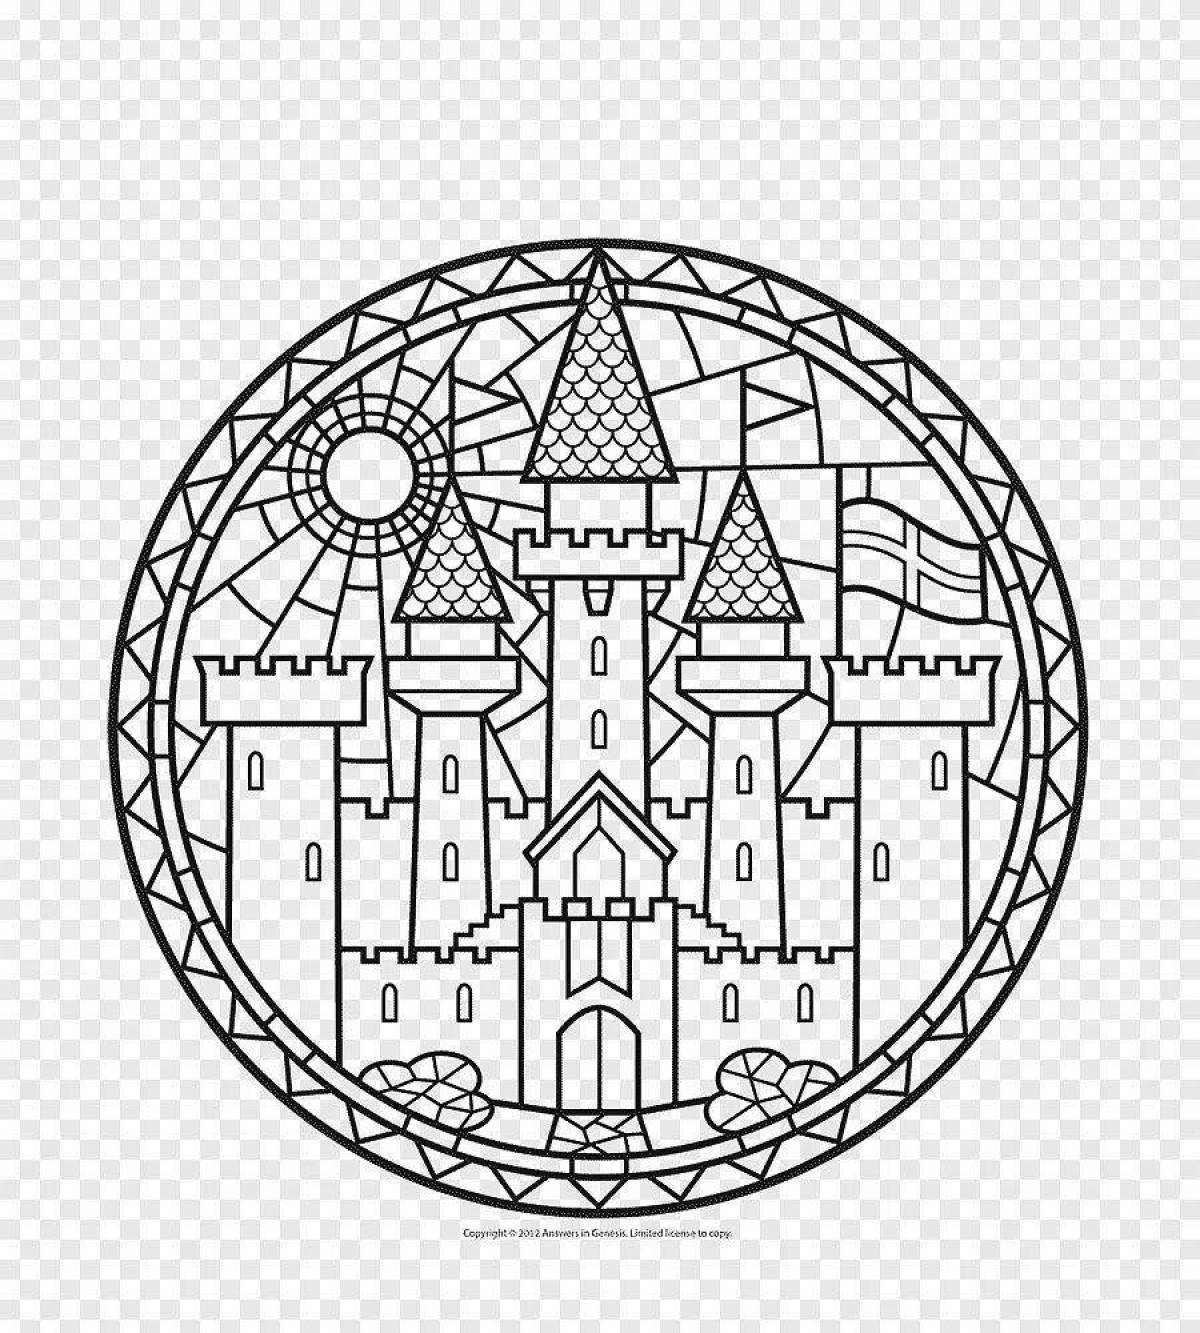 Coloring book palace gothic castle